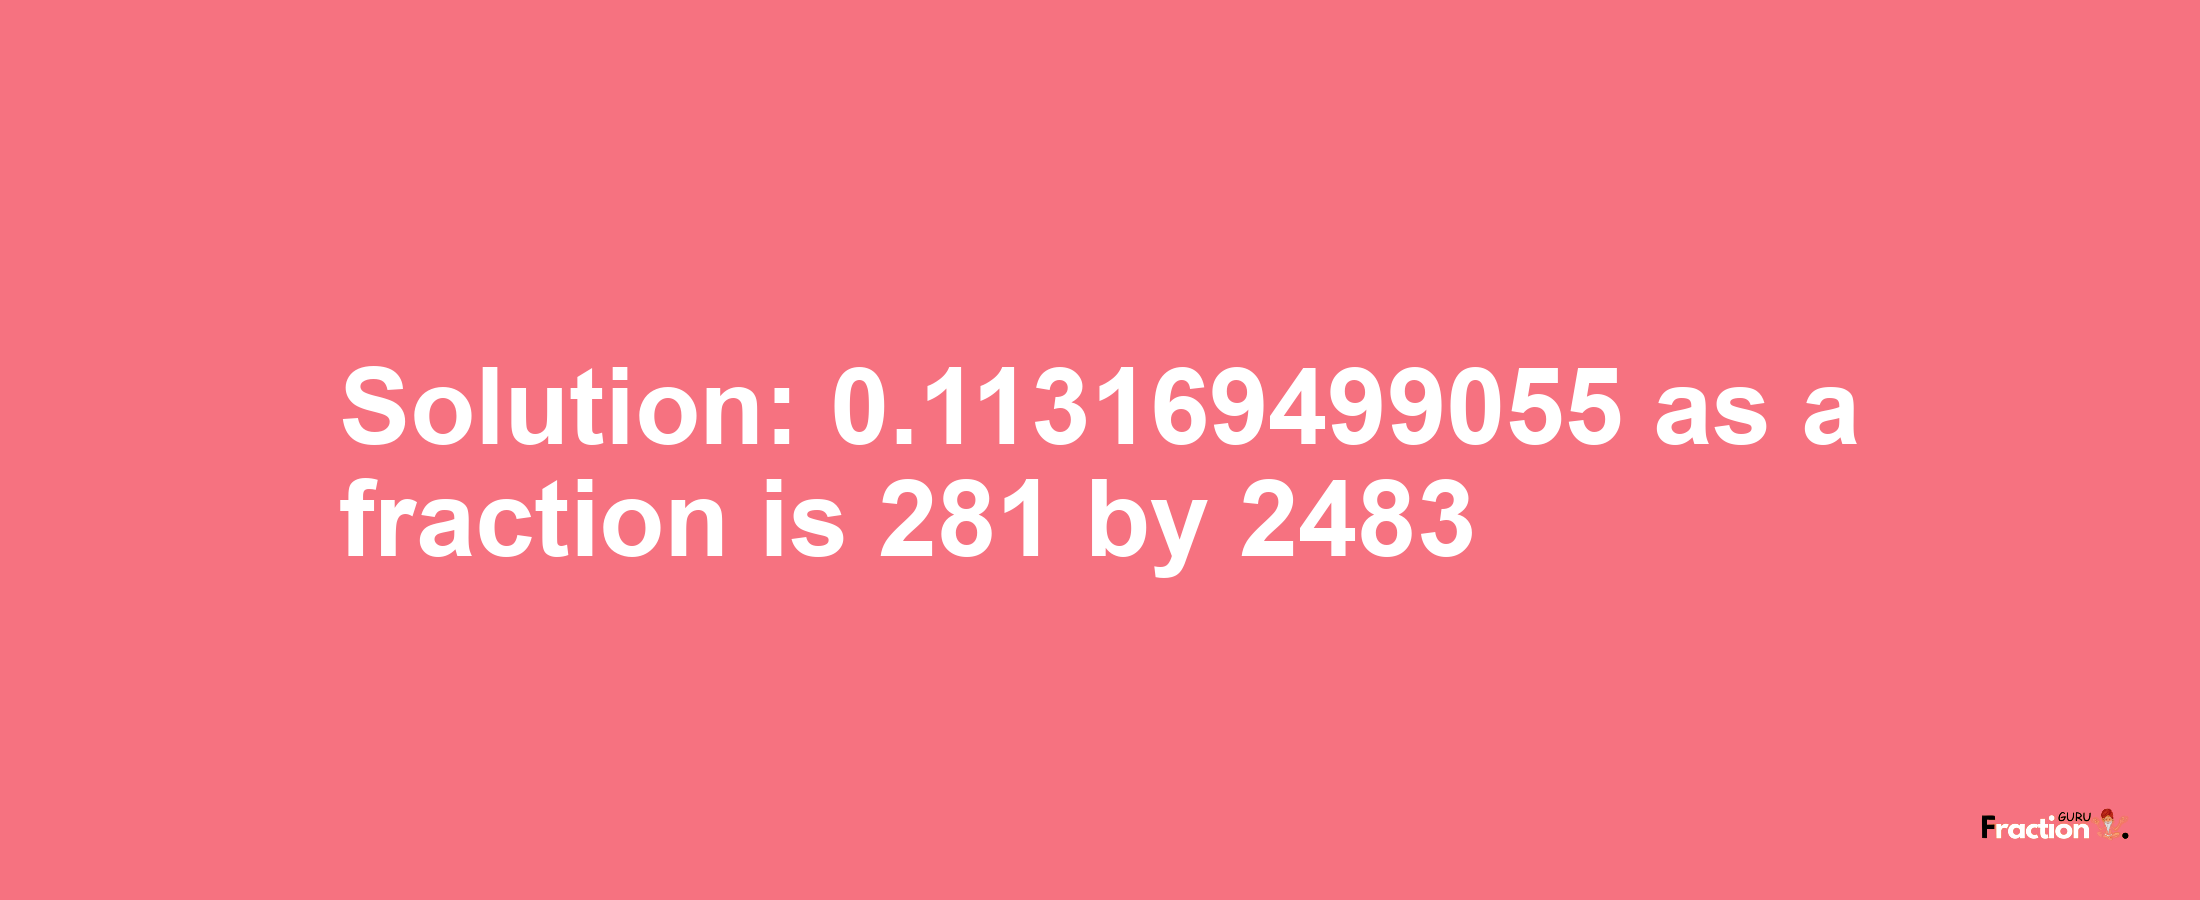 Solution:0.113169499055 as a fraction is 281/2483